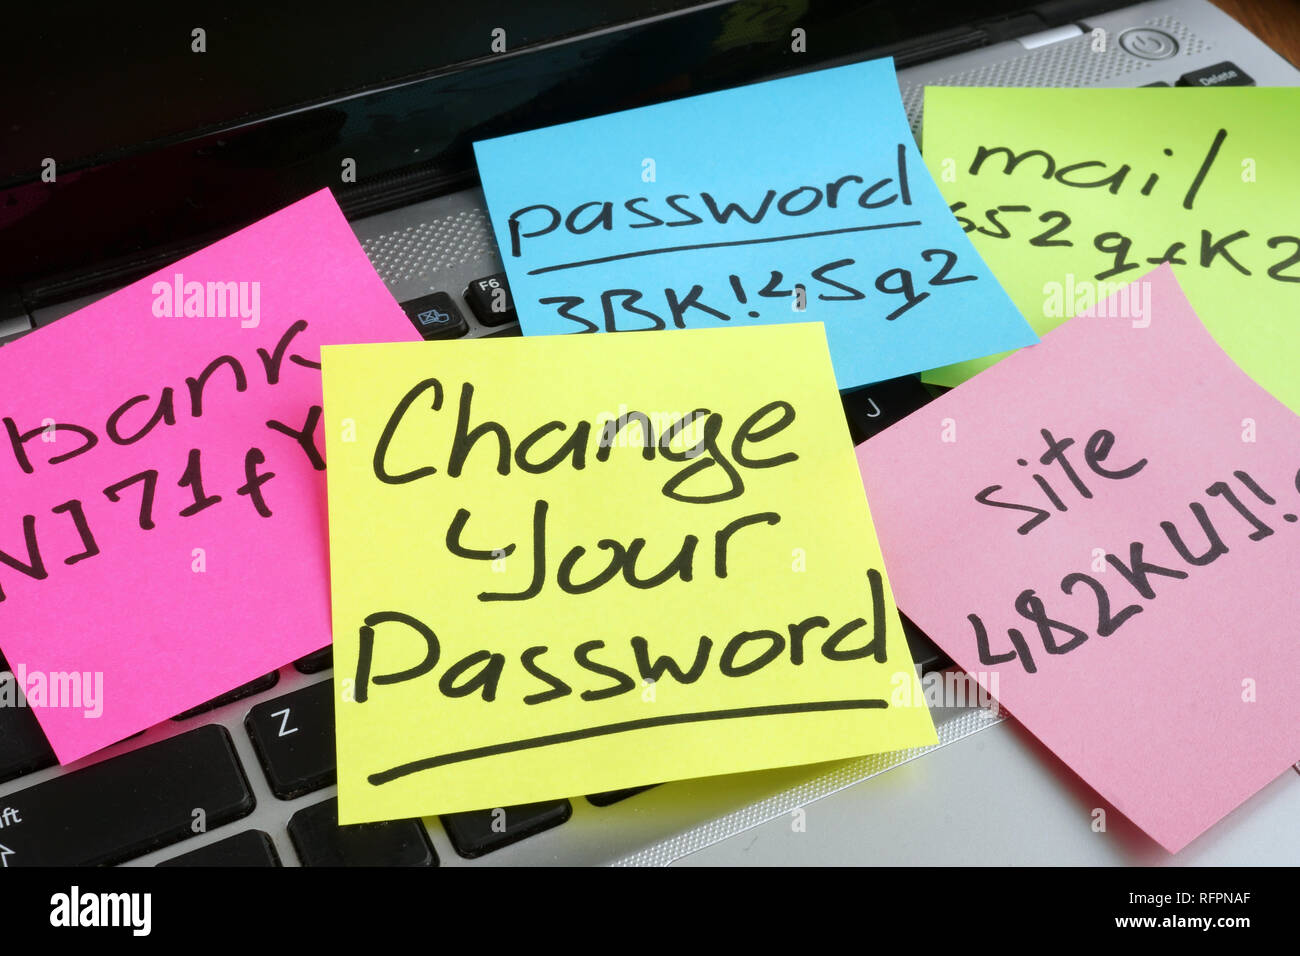 Change your password. Laptop with pieces of paper. Stock Photo